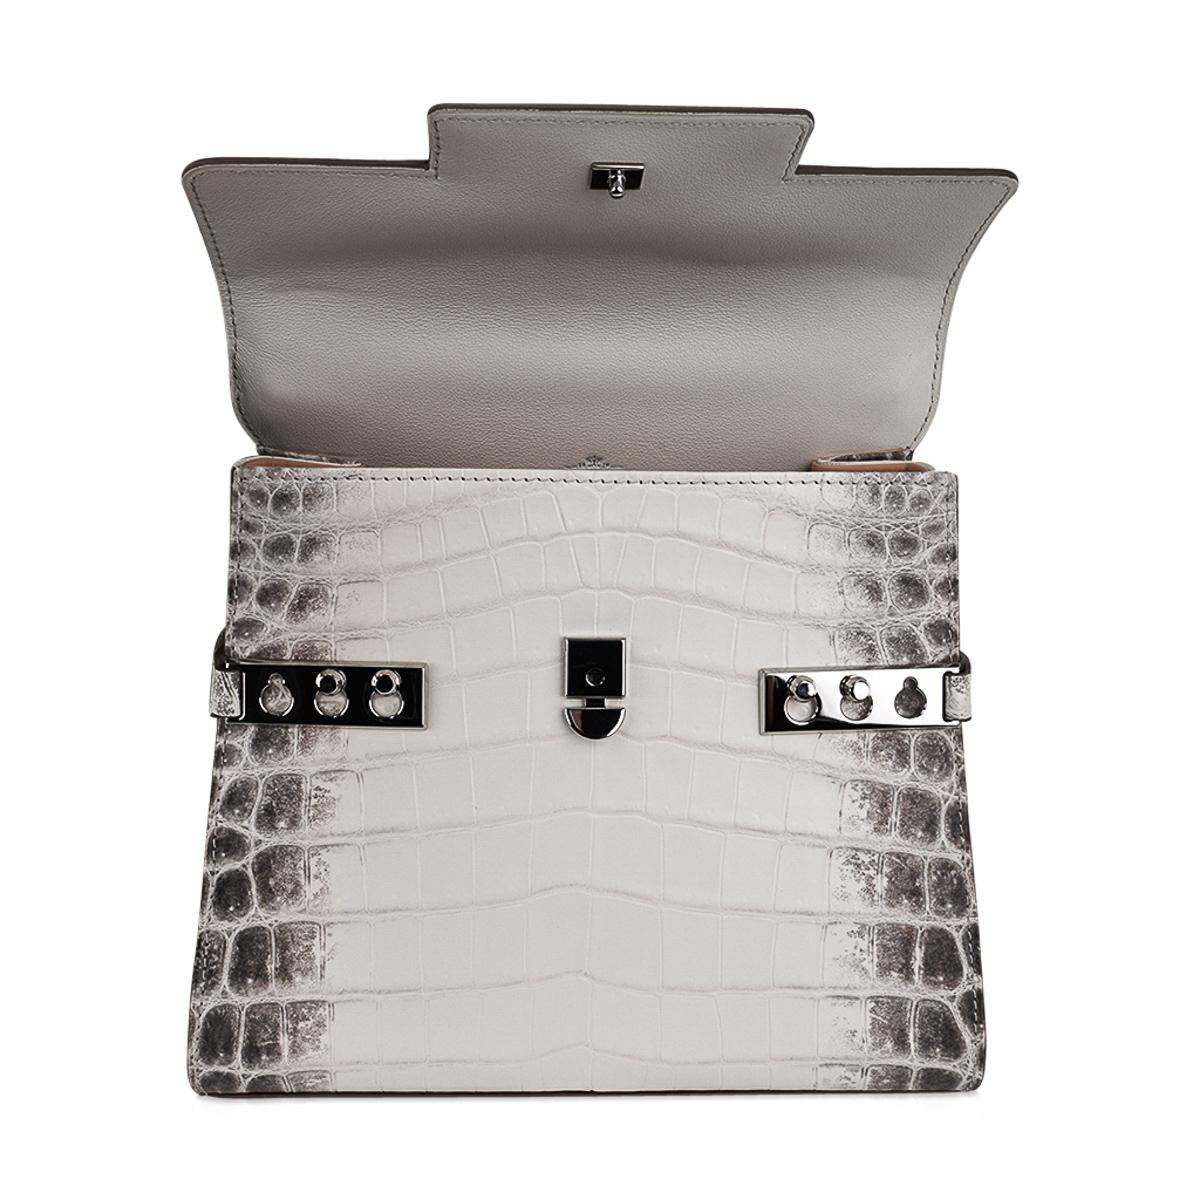 Delvaux Tempete PM Himalaya Crocodile Limited Edition Bag For Sale 6